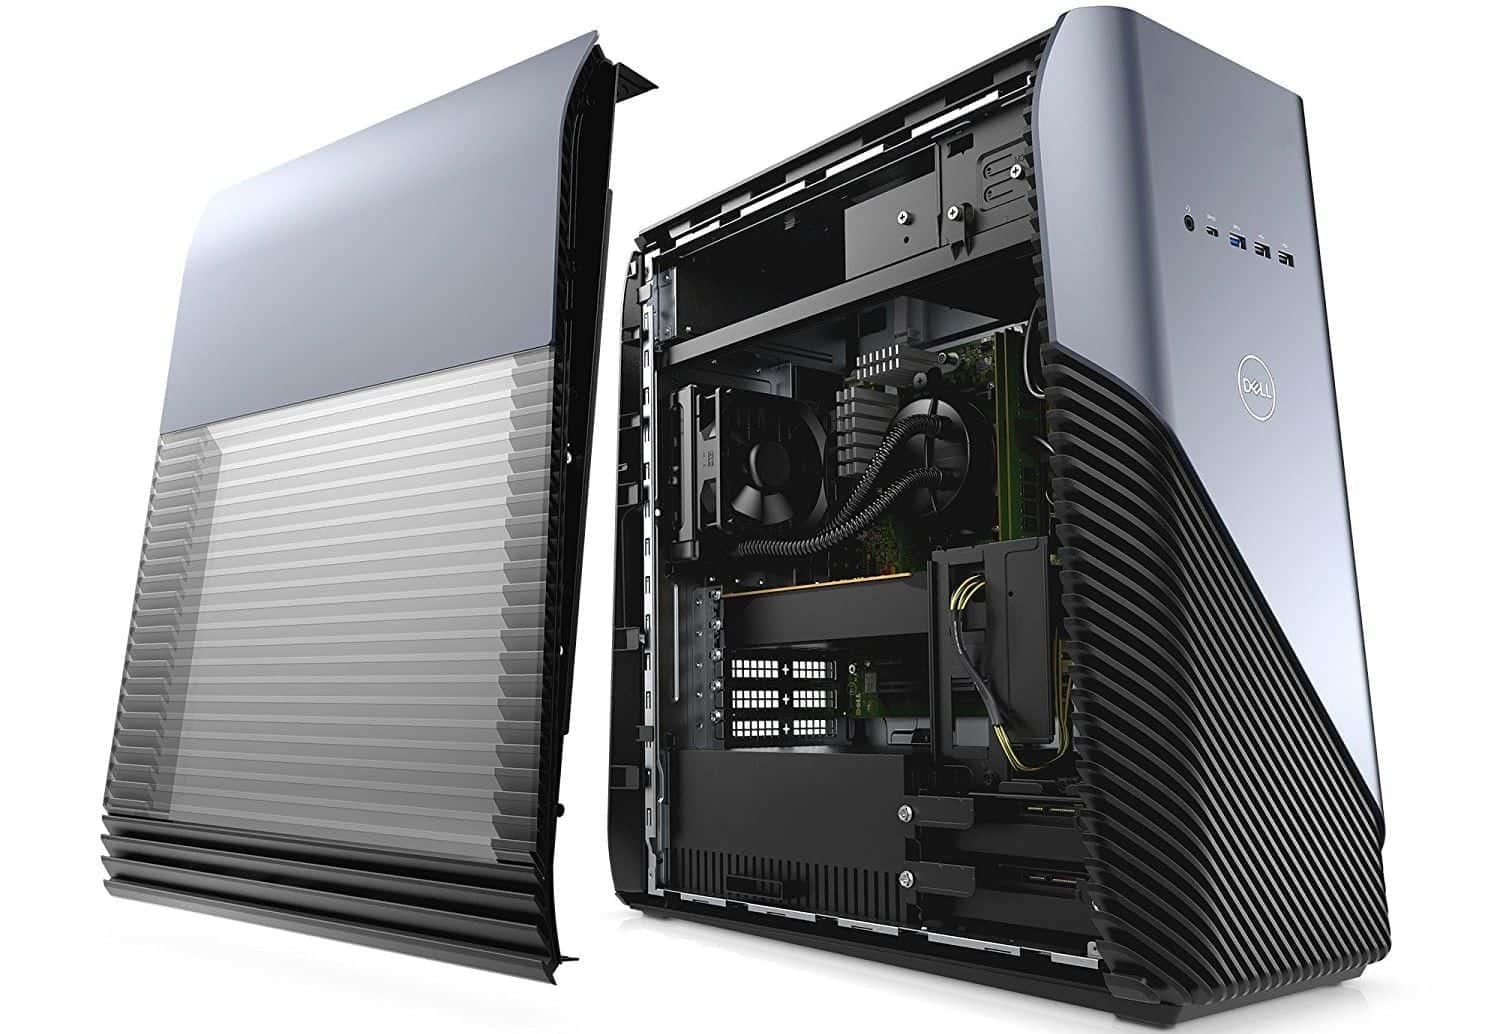 Best Gaming Desktops under $1000 to Suit Your Play Style